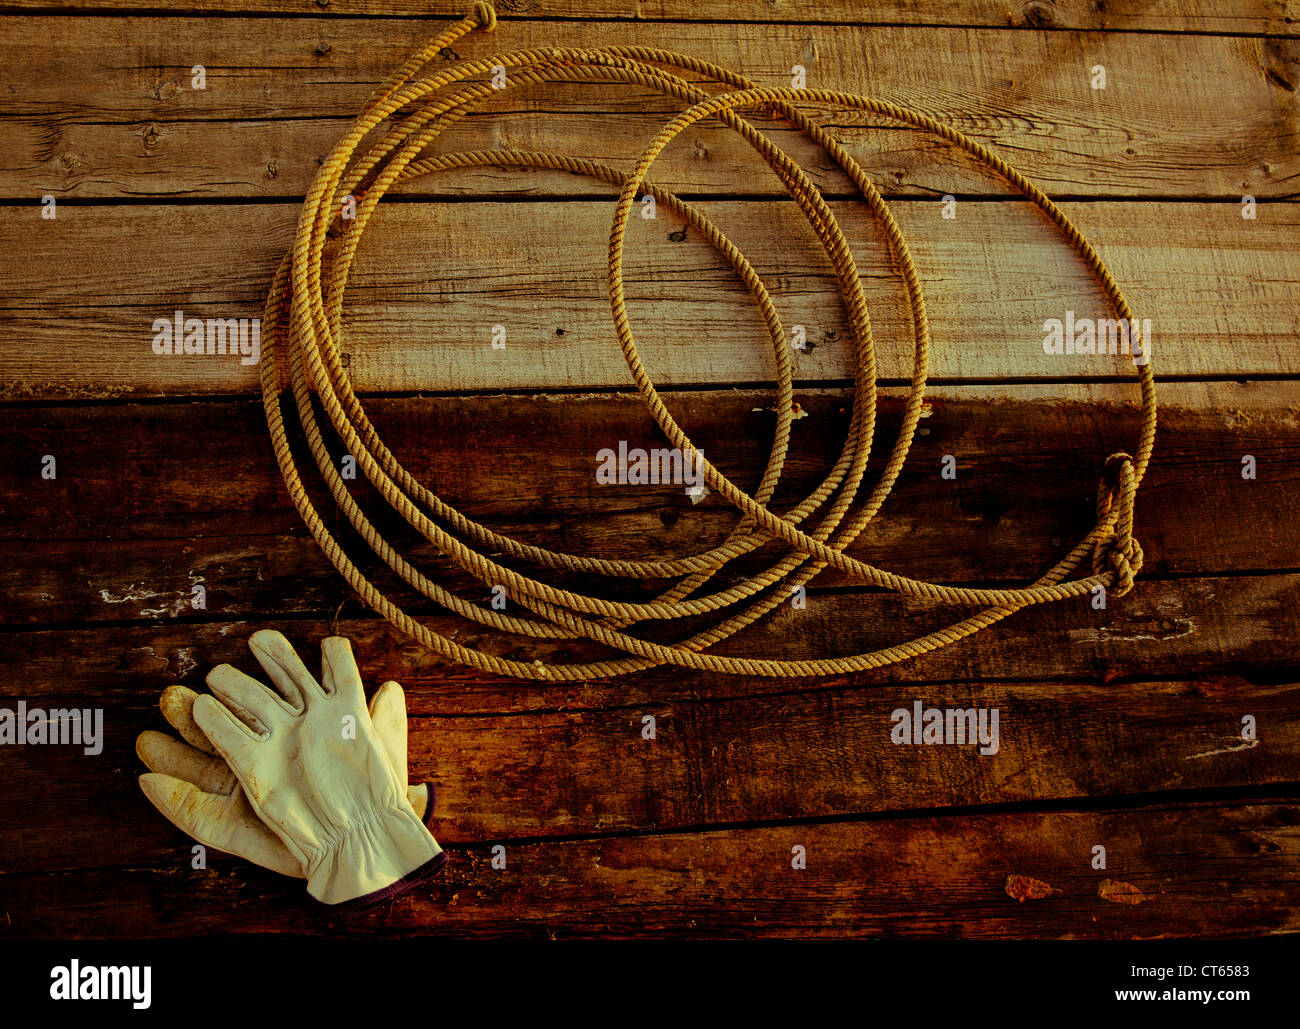 A western cowboy rope (lariat) laying  on an old weathered fence with leather gloves. Stock Photo